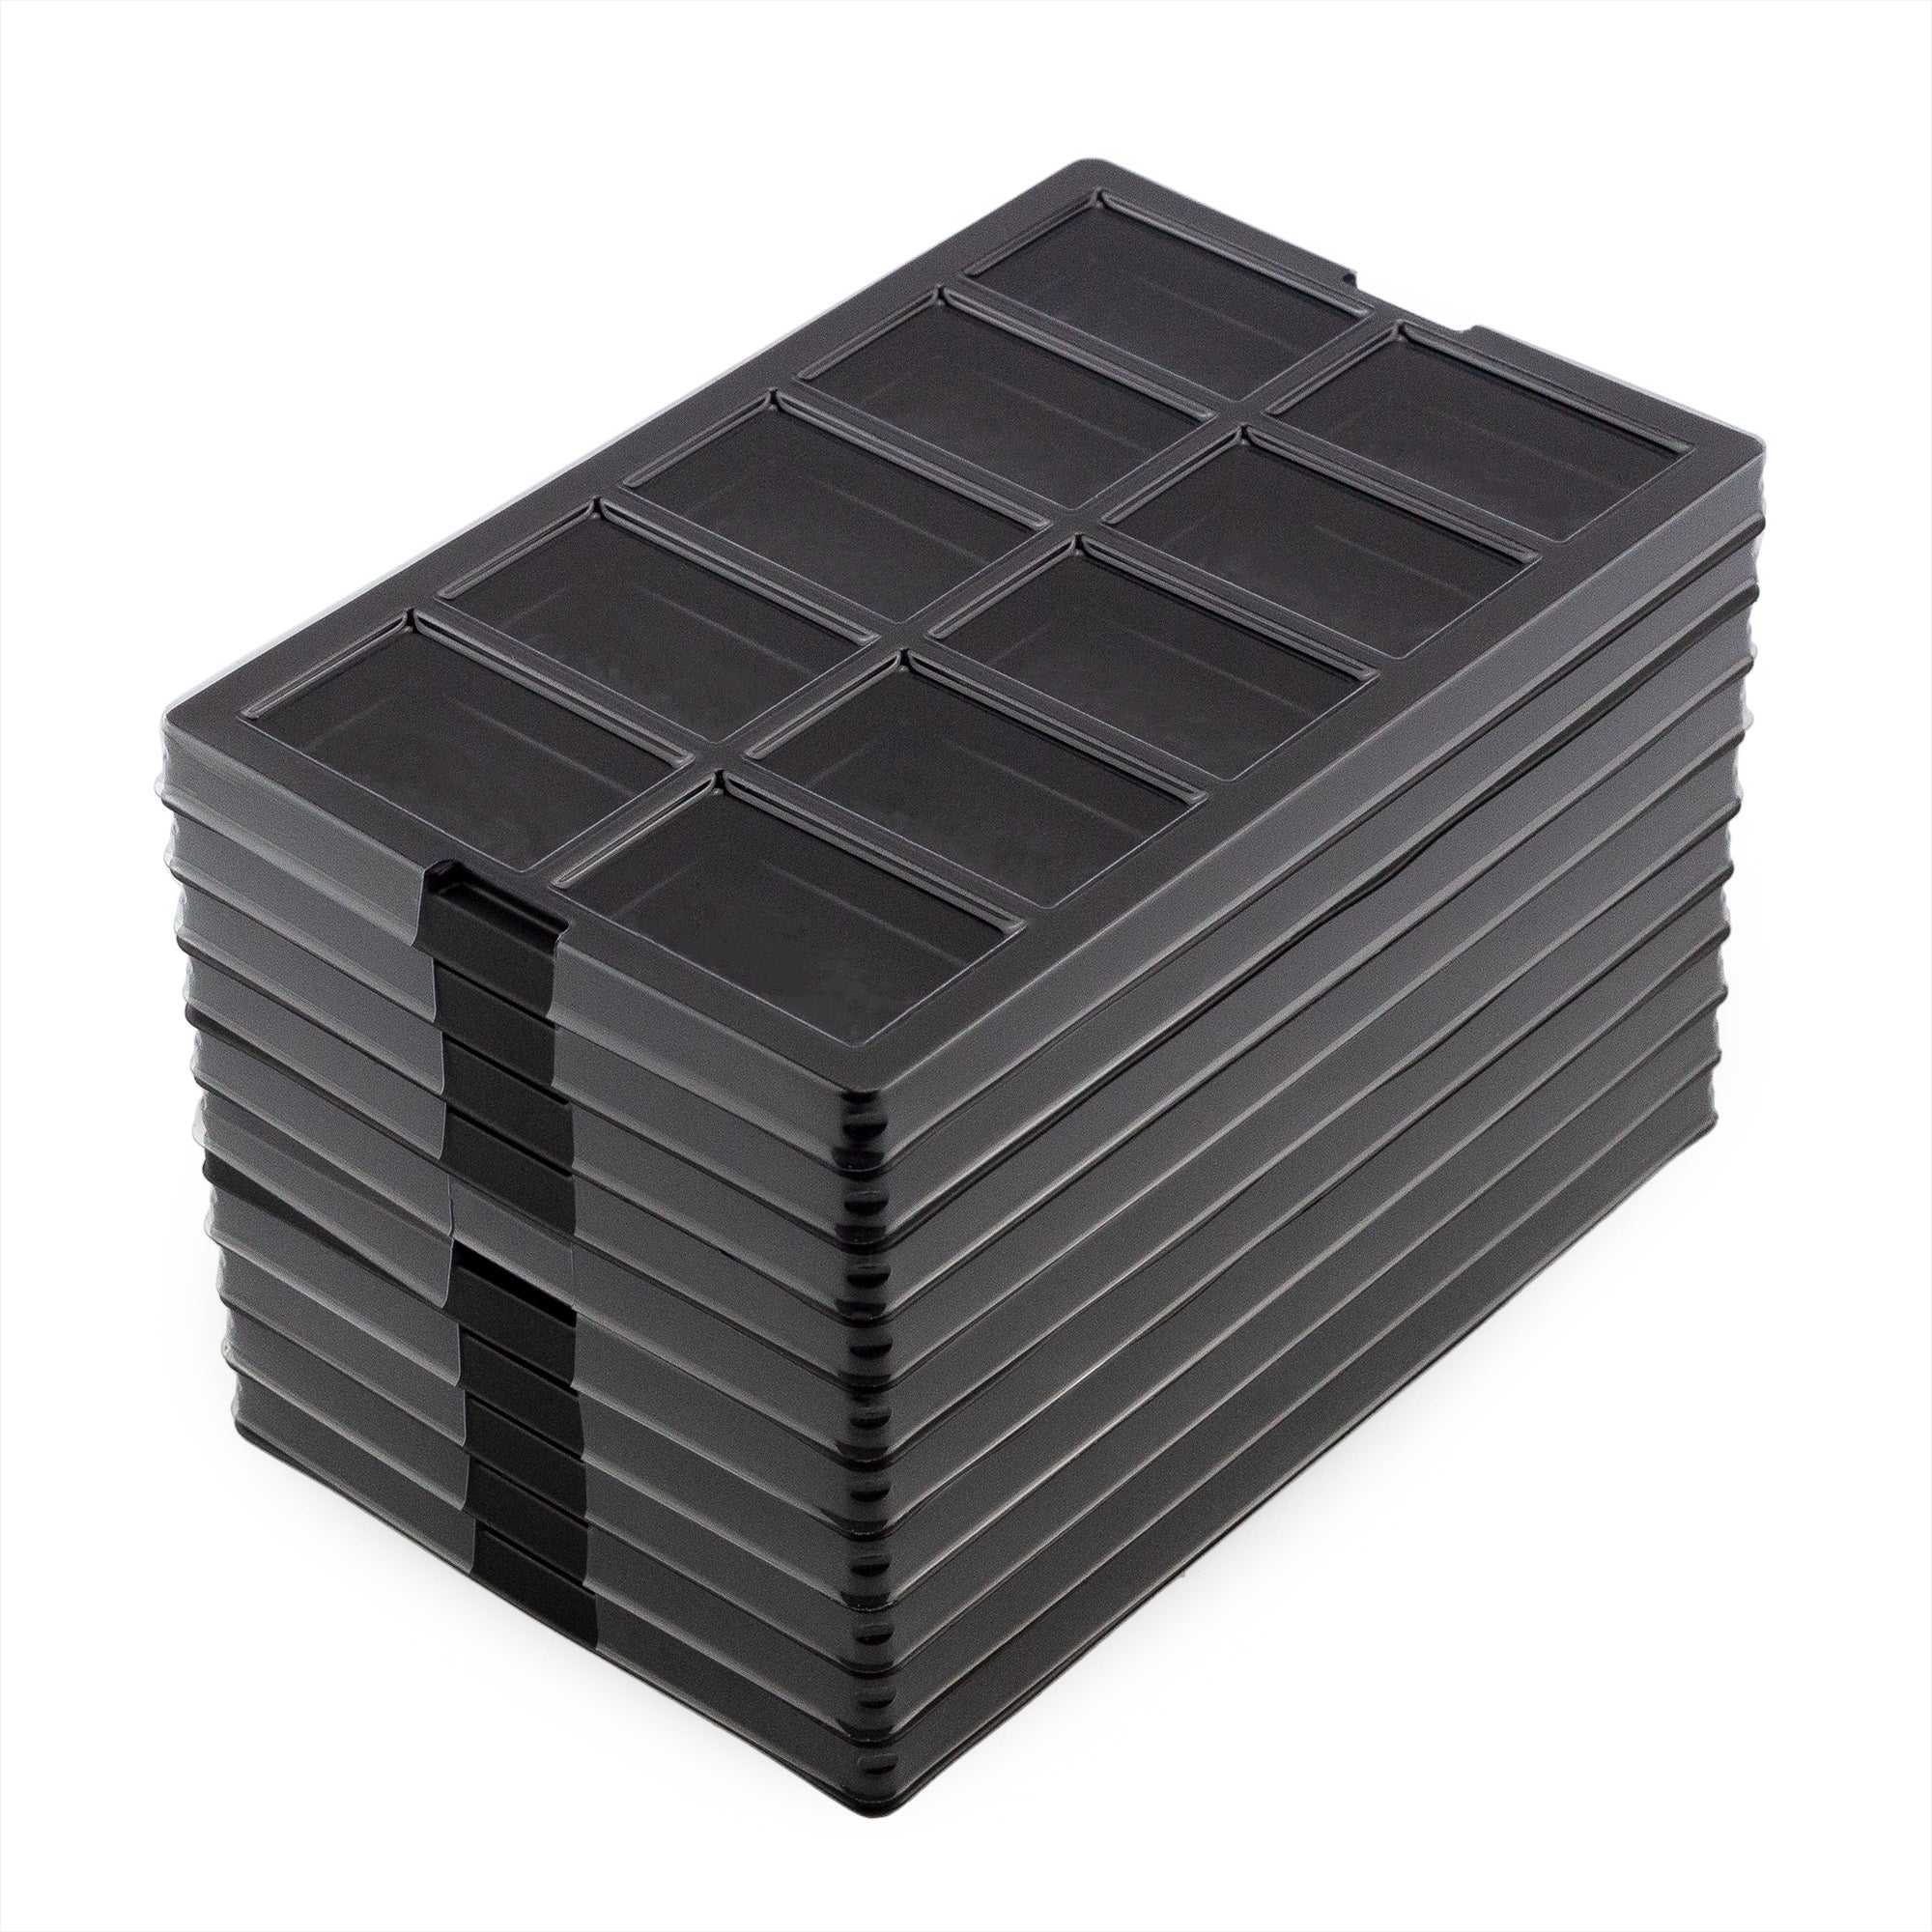 Toy Vault Enamelware Card Sorting Tray (15-Slot); Large Black Metal Card  Tray Organizer for CCG Games and Board Games